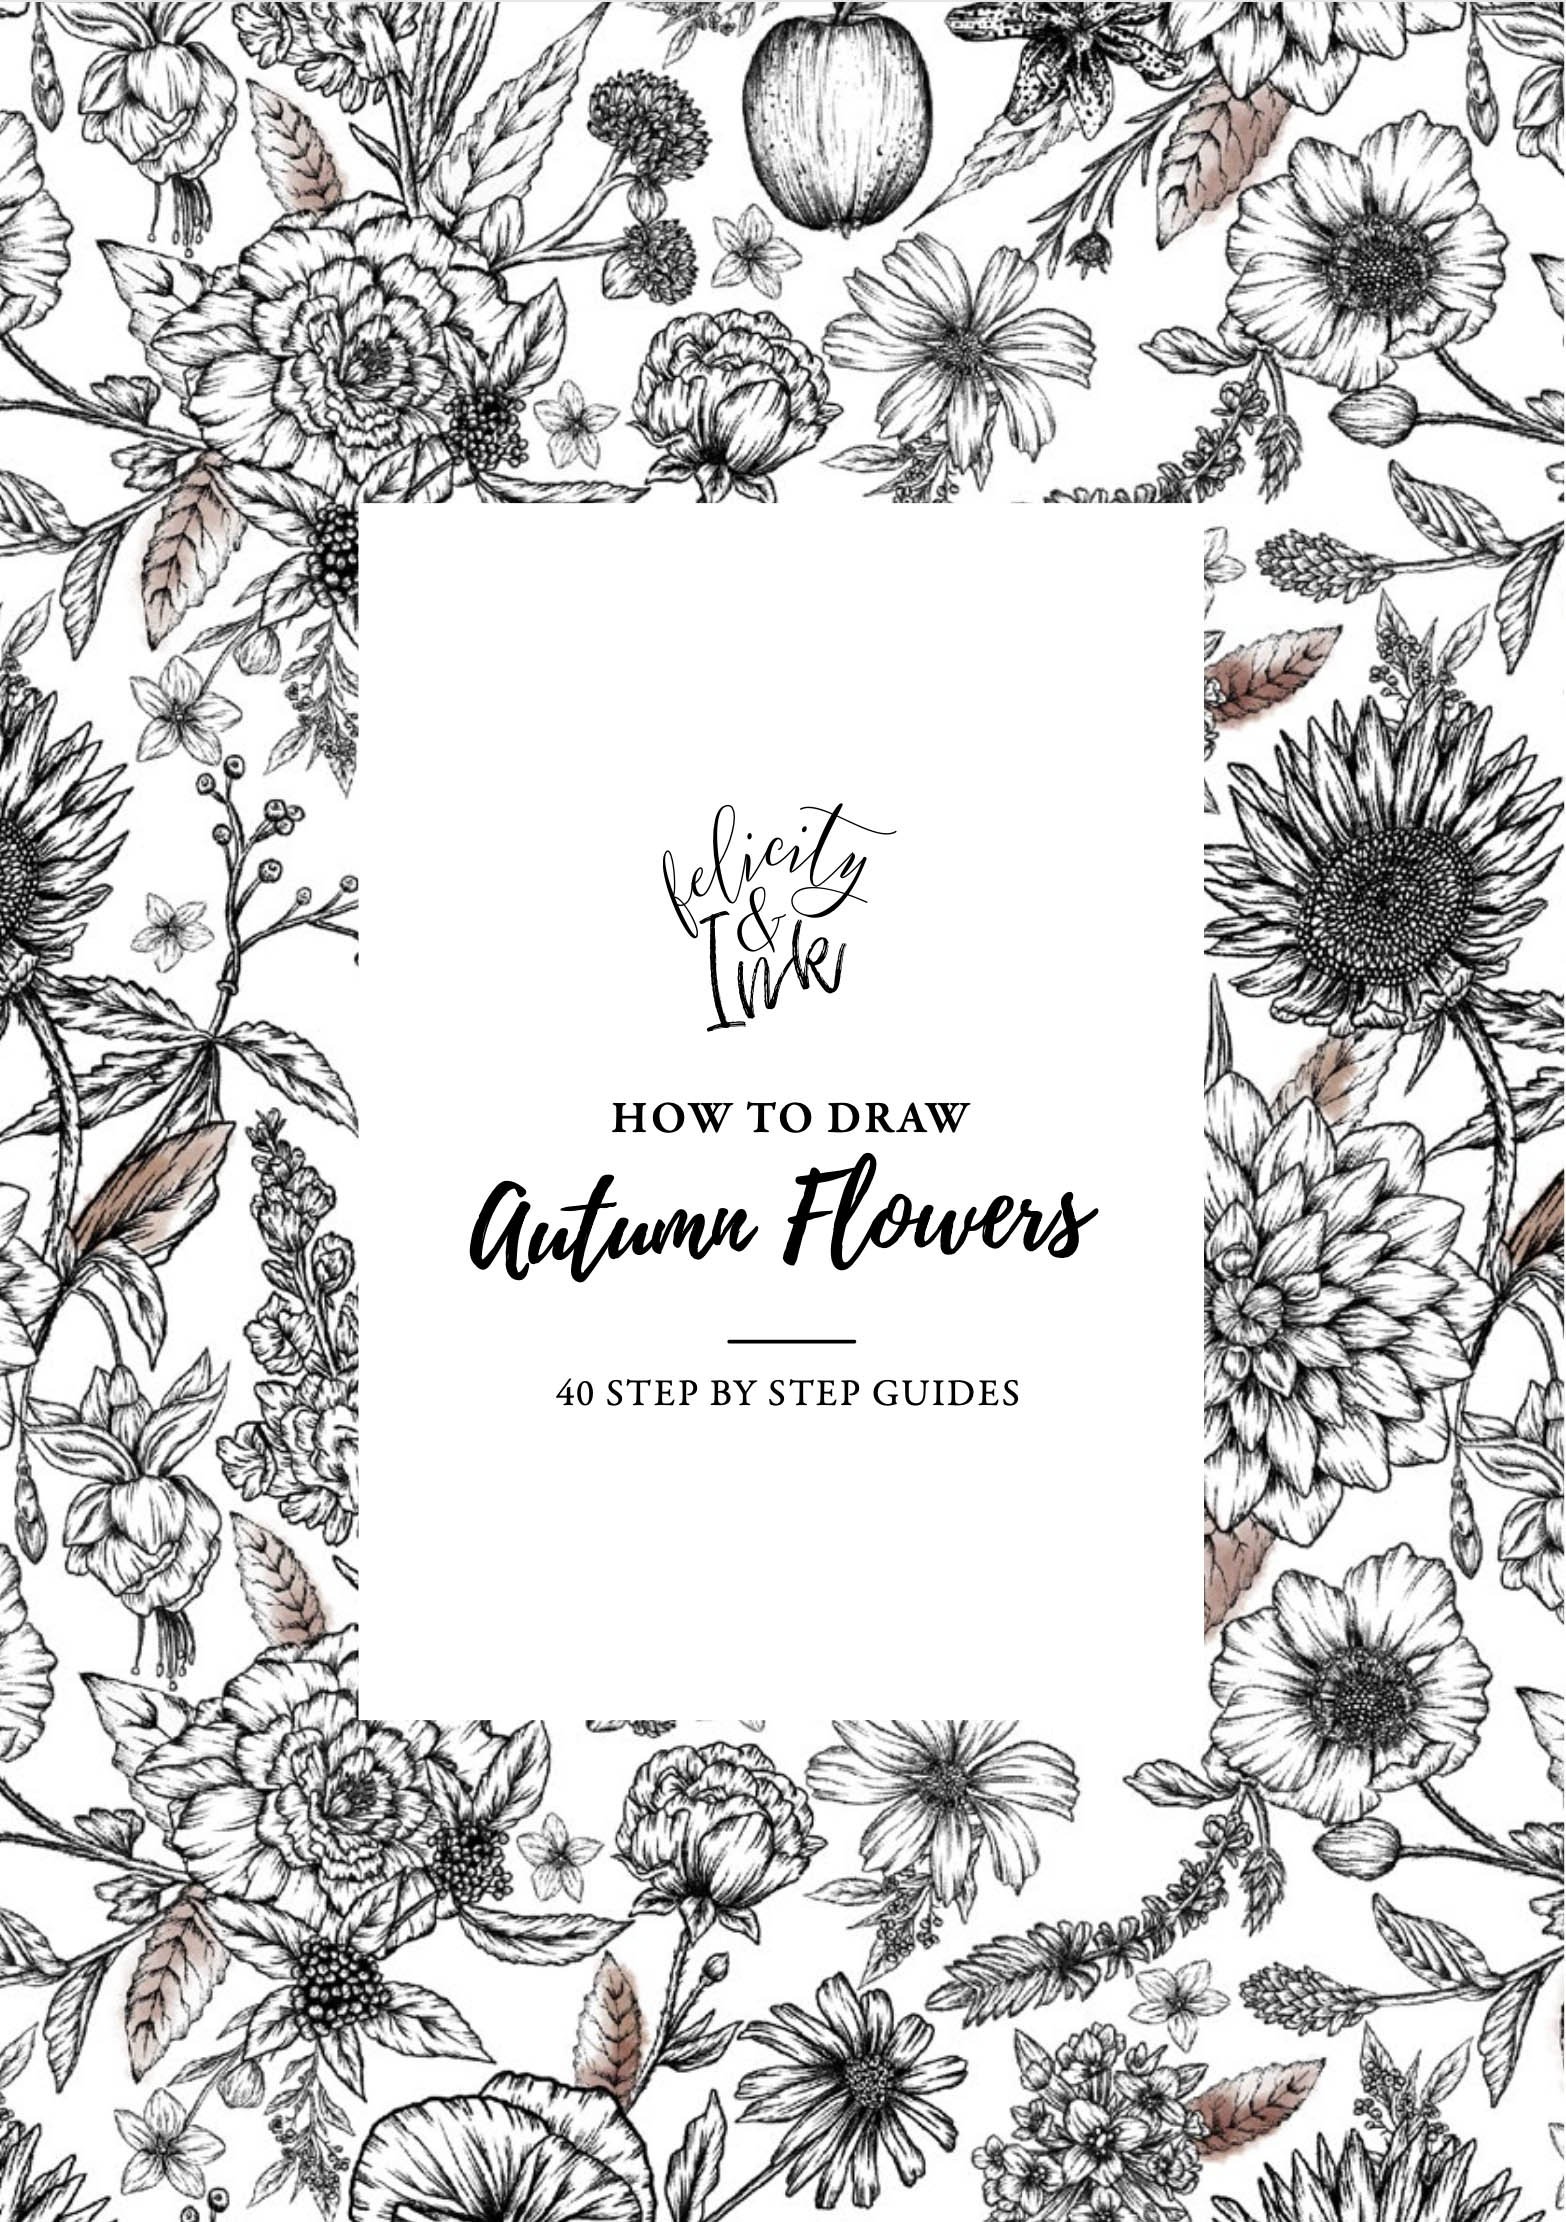 felicity-and-ink-how-to-draw-autumn-flowers-step-by-step-ebook.jpg